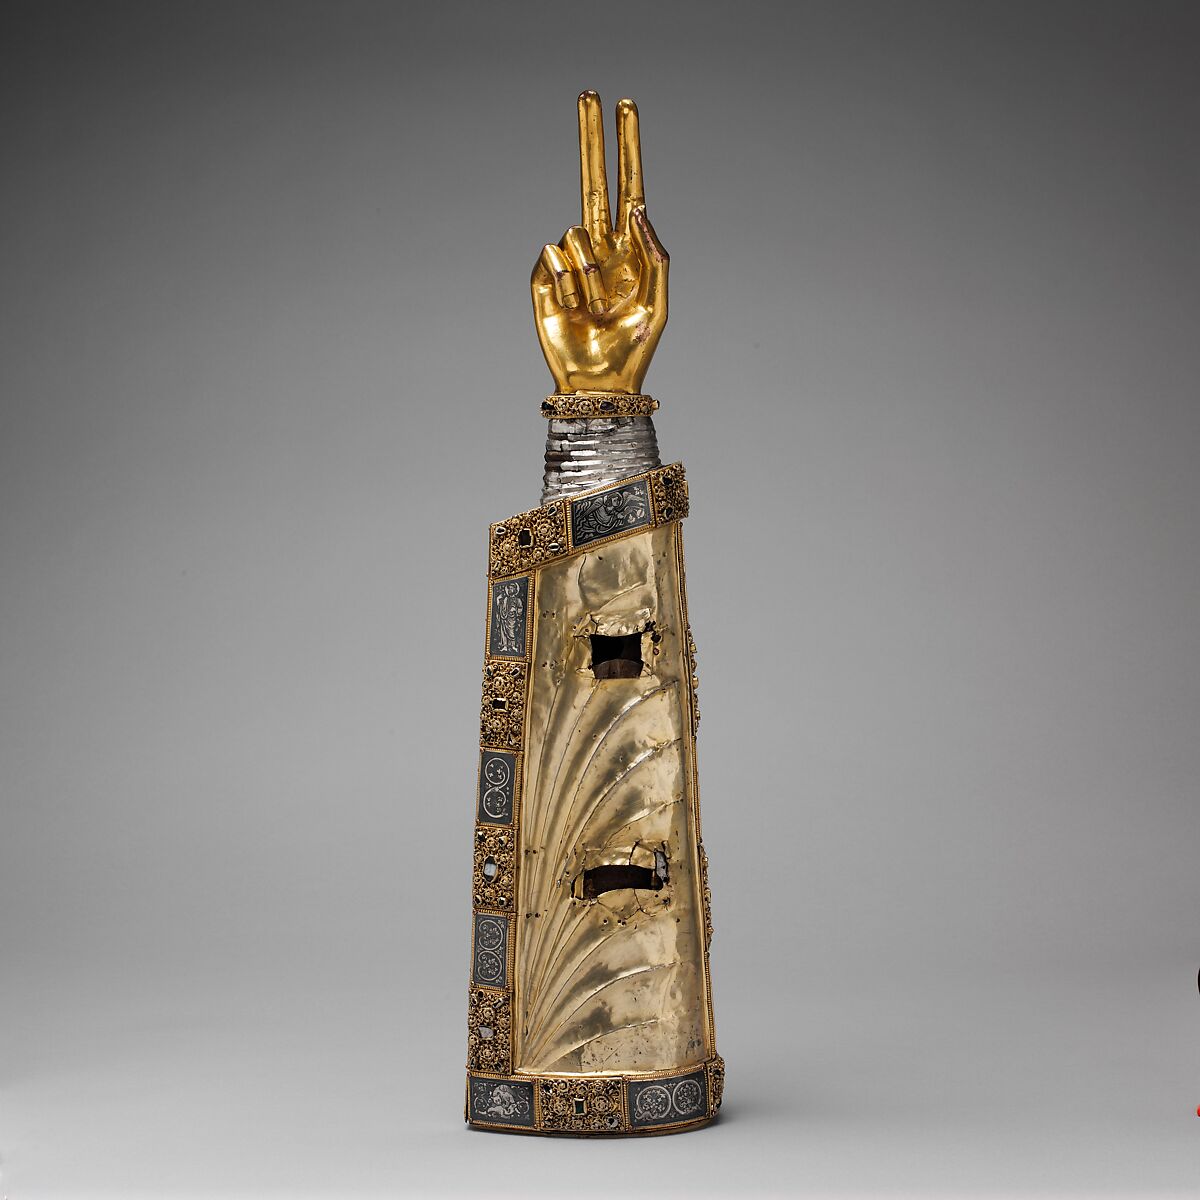 Arm Reliquary, Silver, gilded silver, niello, and gems; wood core , South Netherlandish 